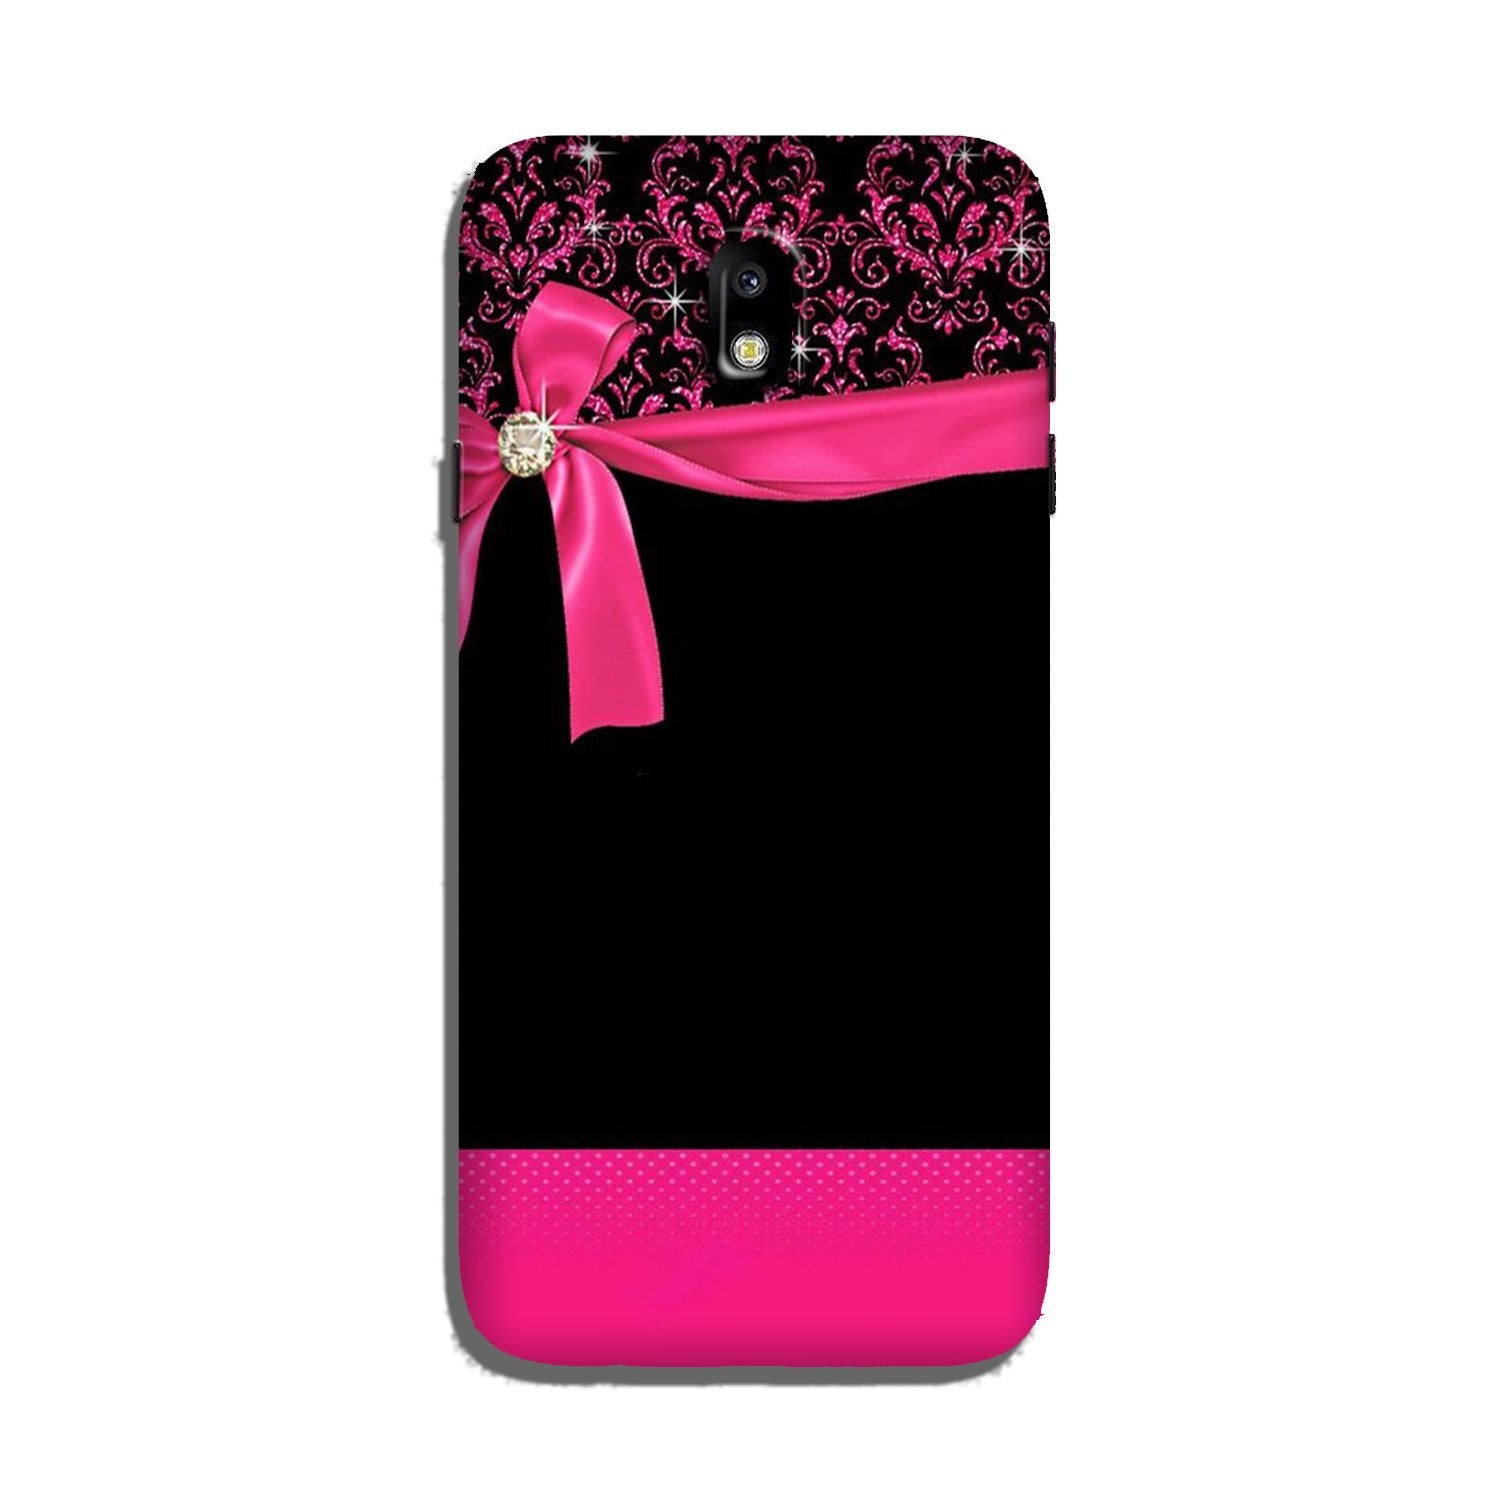 Gift Wrap4 Case for Galaxy J5 Pro